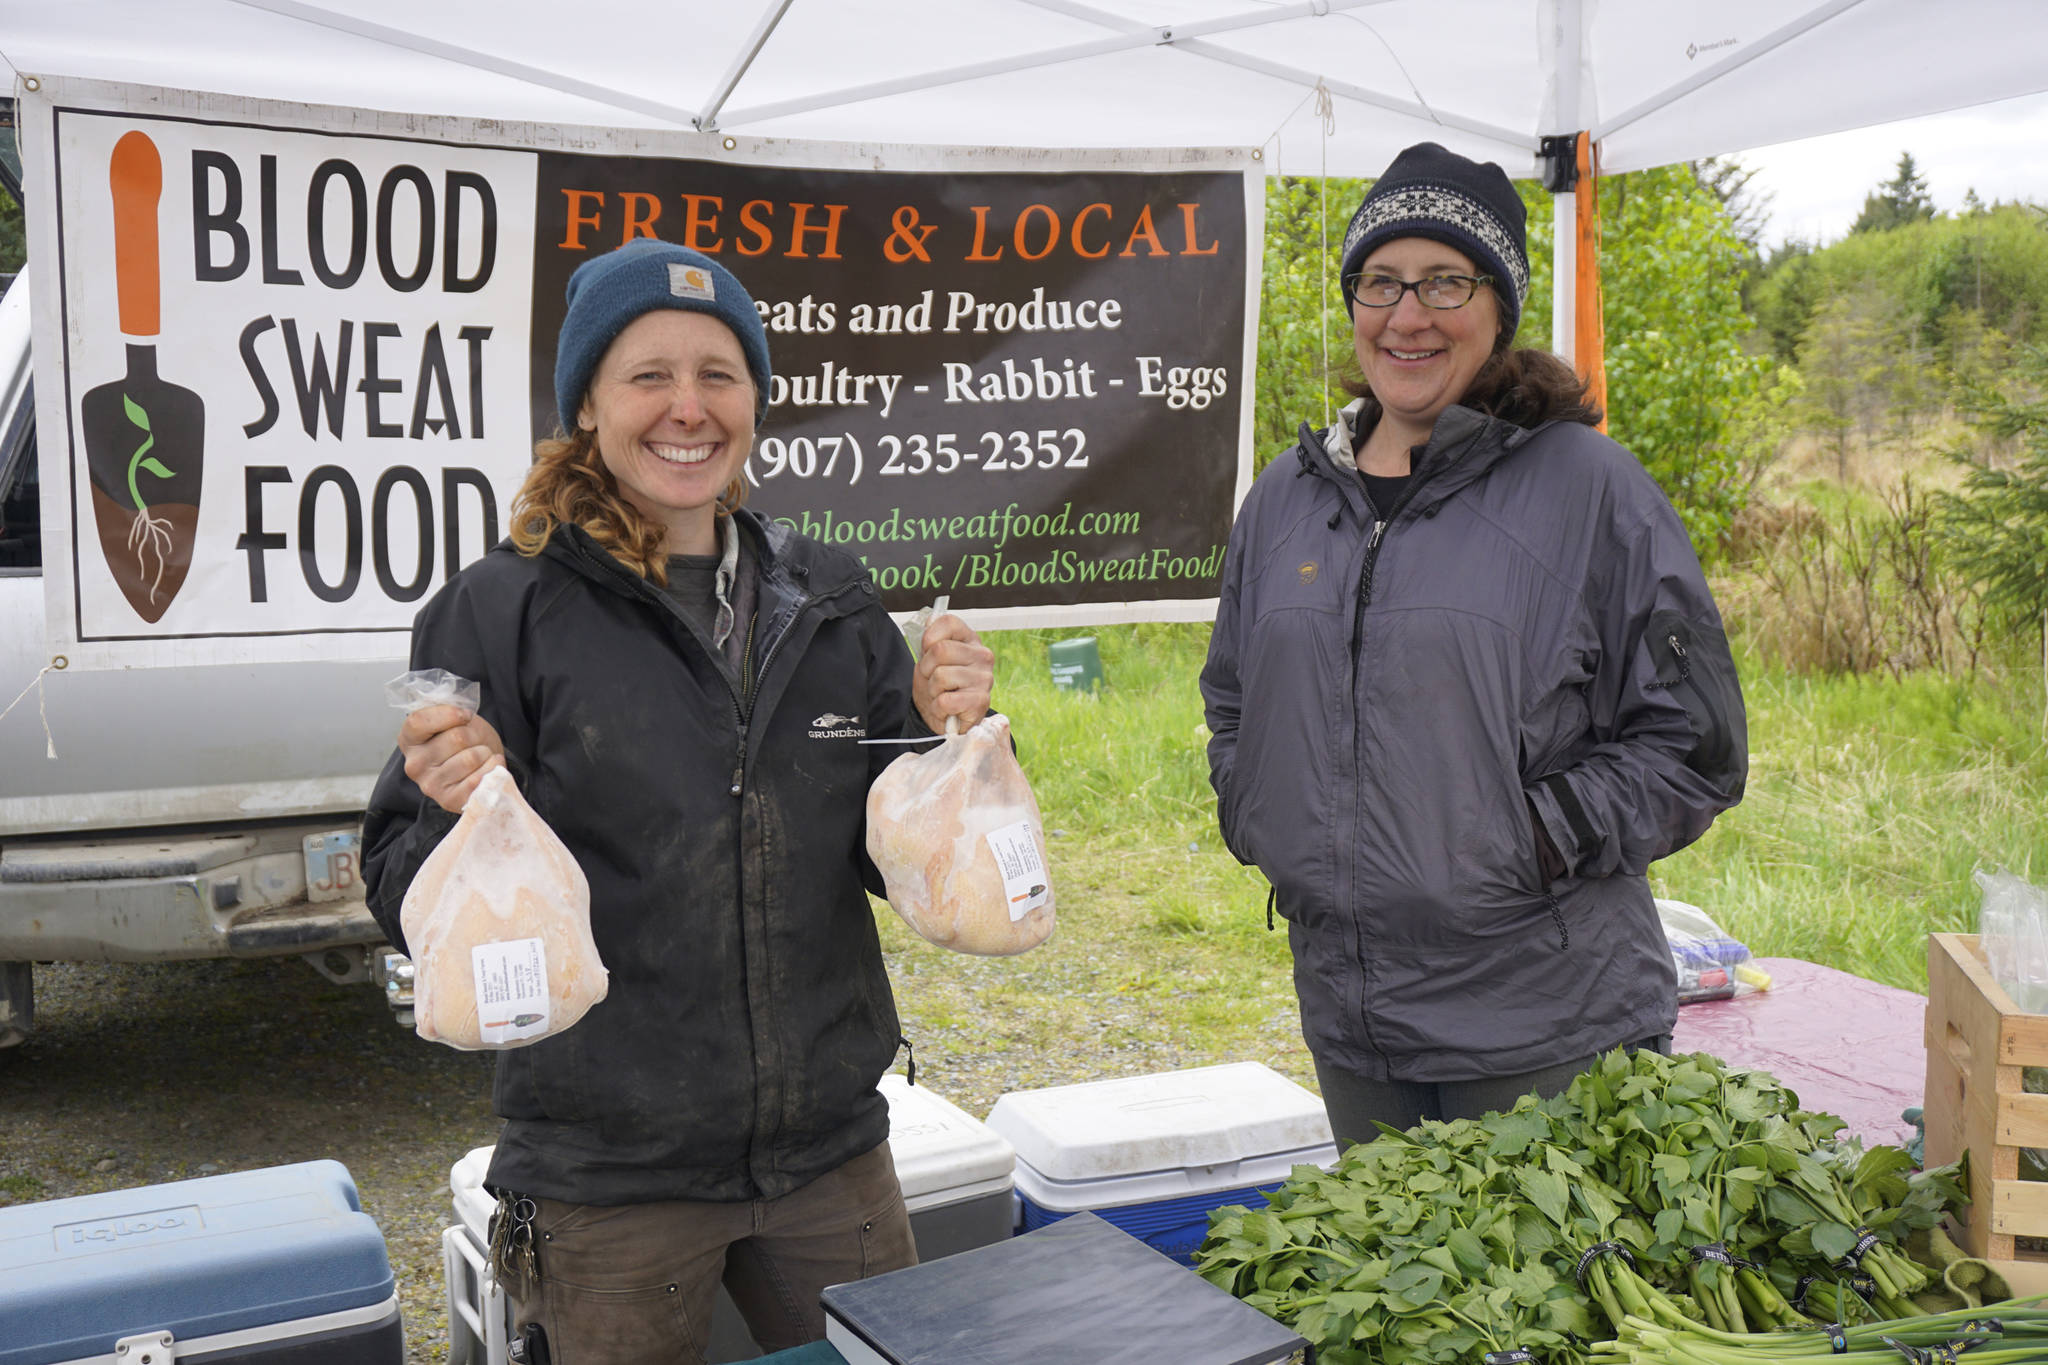 Jenni Medley of Blood, Sweat and Food holds up fresh chickens while Jen Becker watches at the opening of the Homer Farmers Market on May 25, 2019, in Homer, Alaska. (Photo by Michael Armstrong/Homer News)